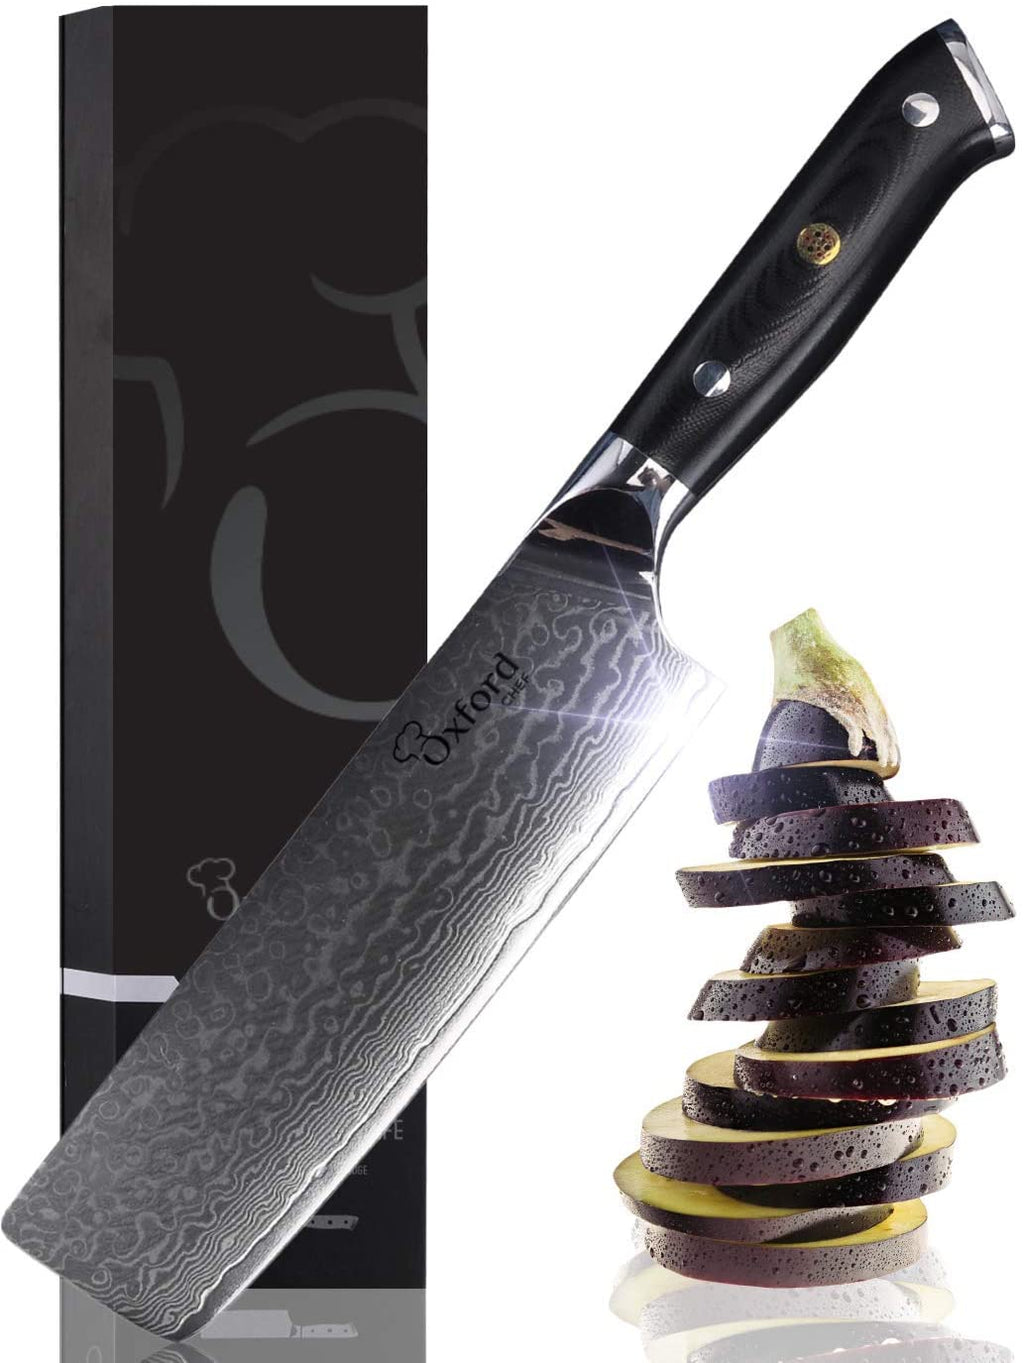  oFuun Paring Knife, 5 Inch Japanese Kitchen Knife, VG-10  Damascus High Carbon Stainless Steel Knife for Fruit and Vegetable Cutting  Chef Knives: Home & Kitchen